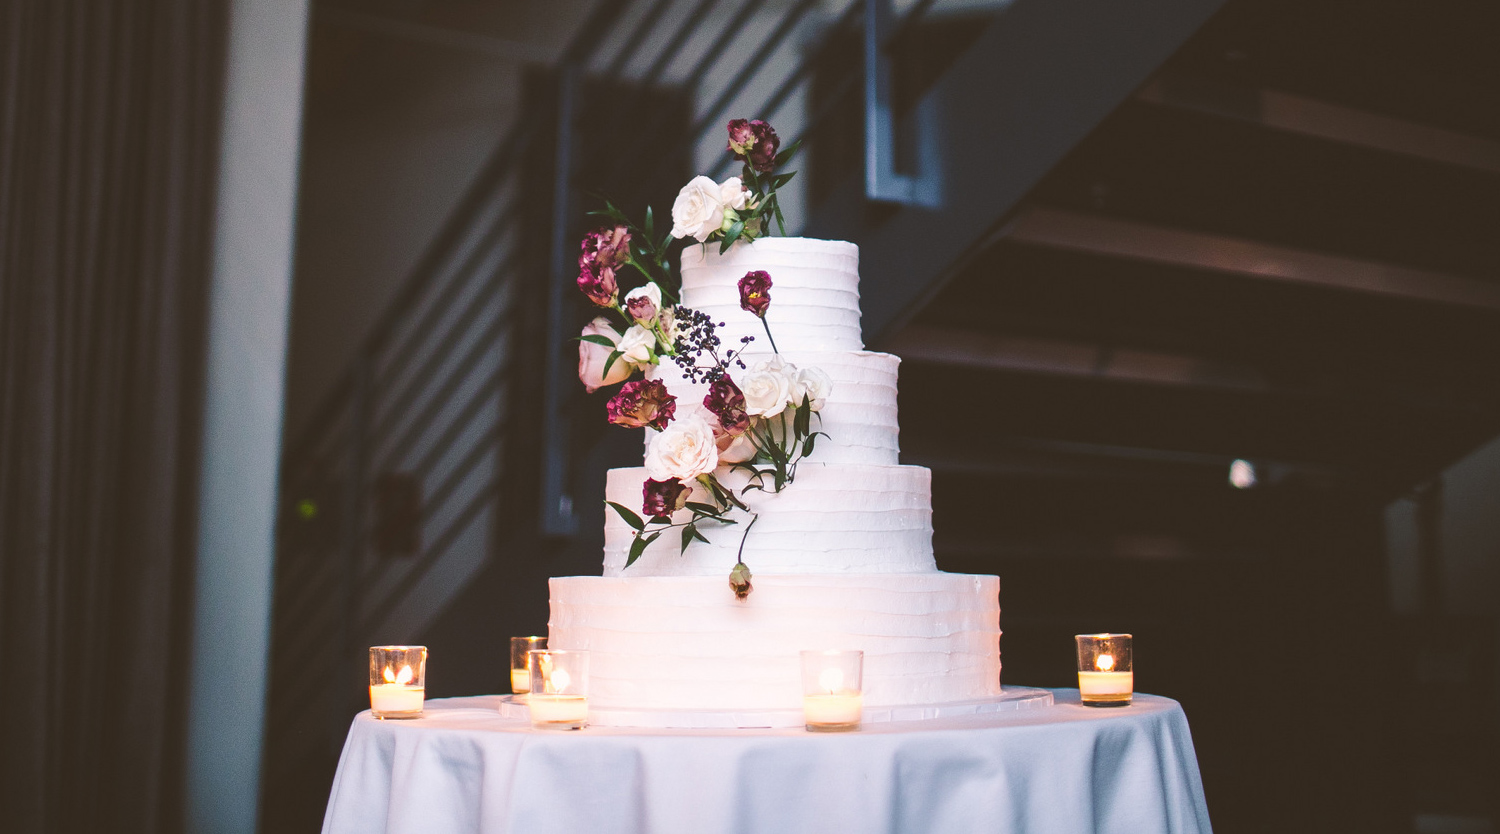 Photo: white frosted wedding cake, flowers and leaves sticking out of the four tiers